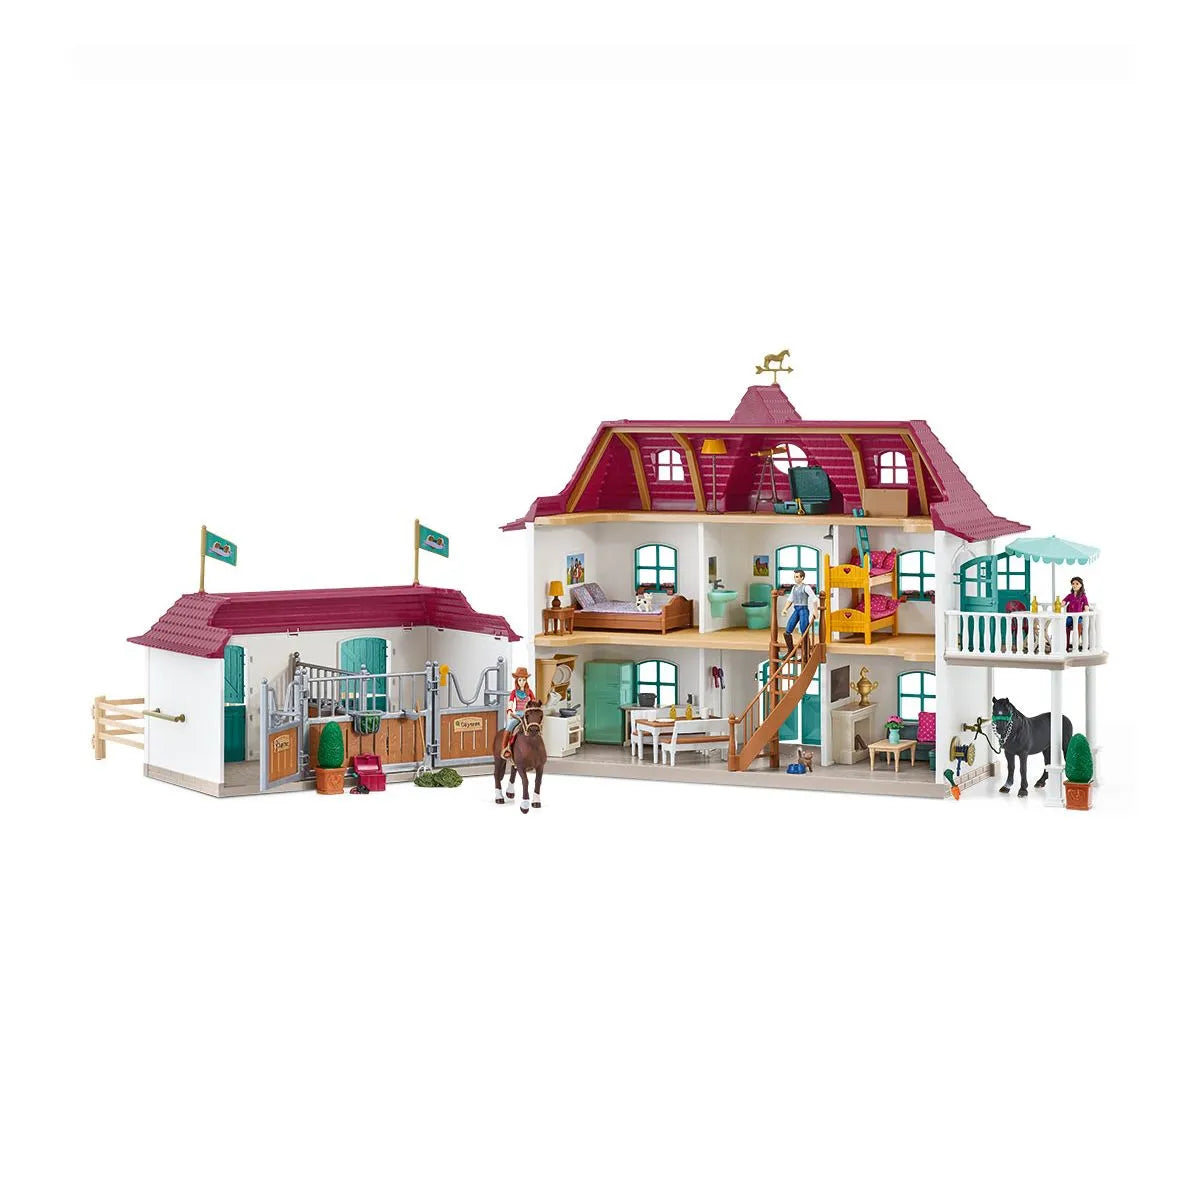 Lakeside Country House and Stable - 56cm